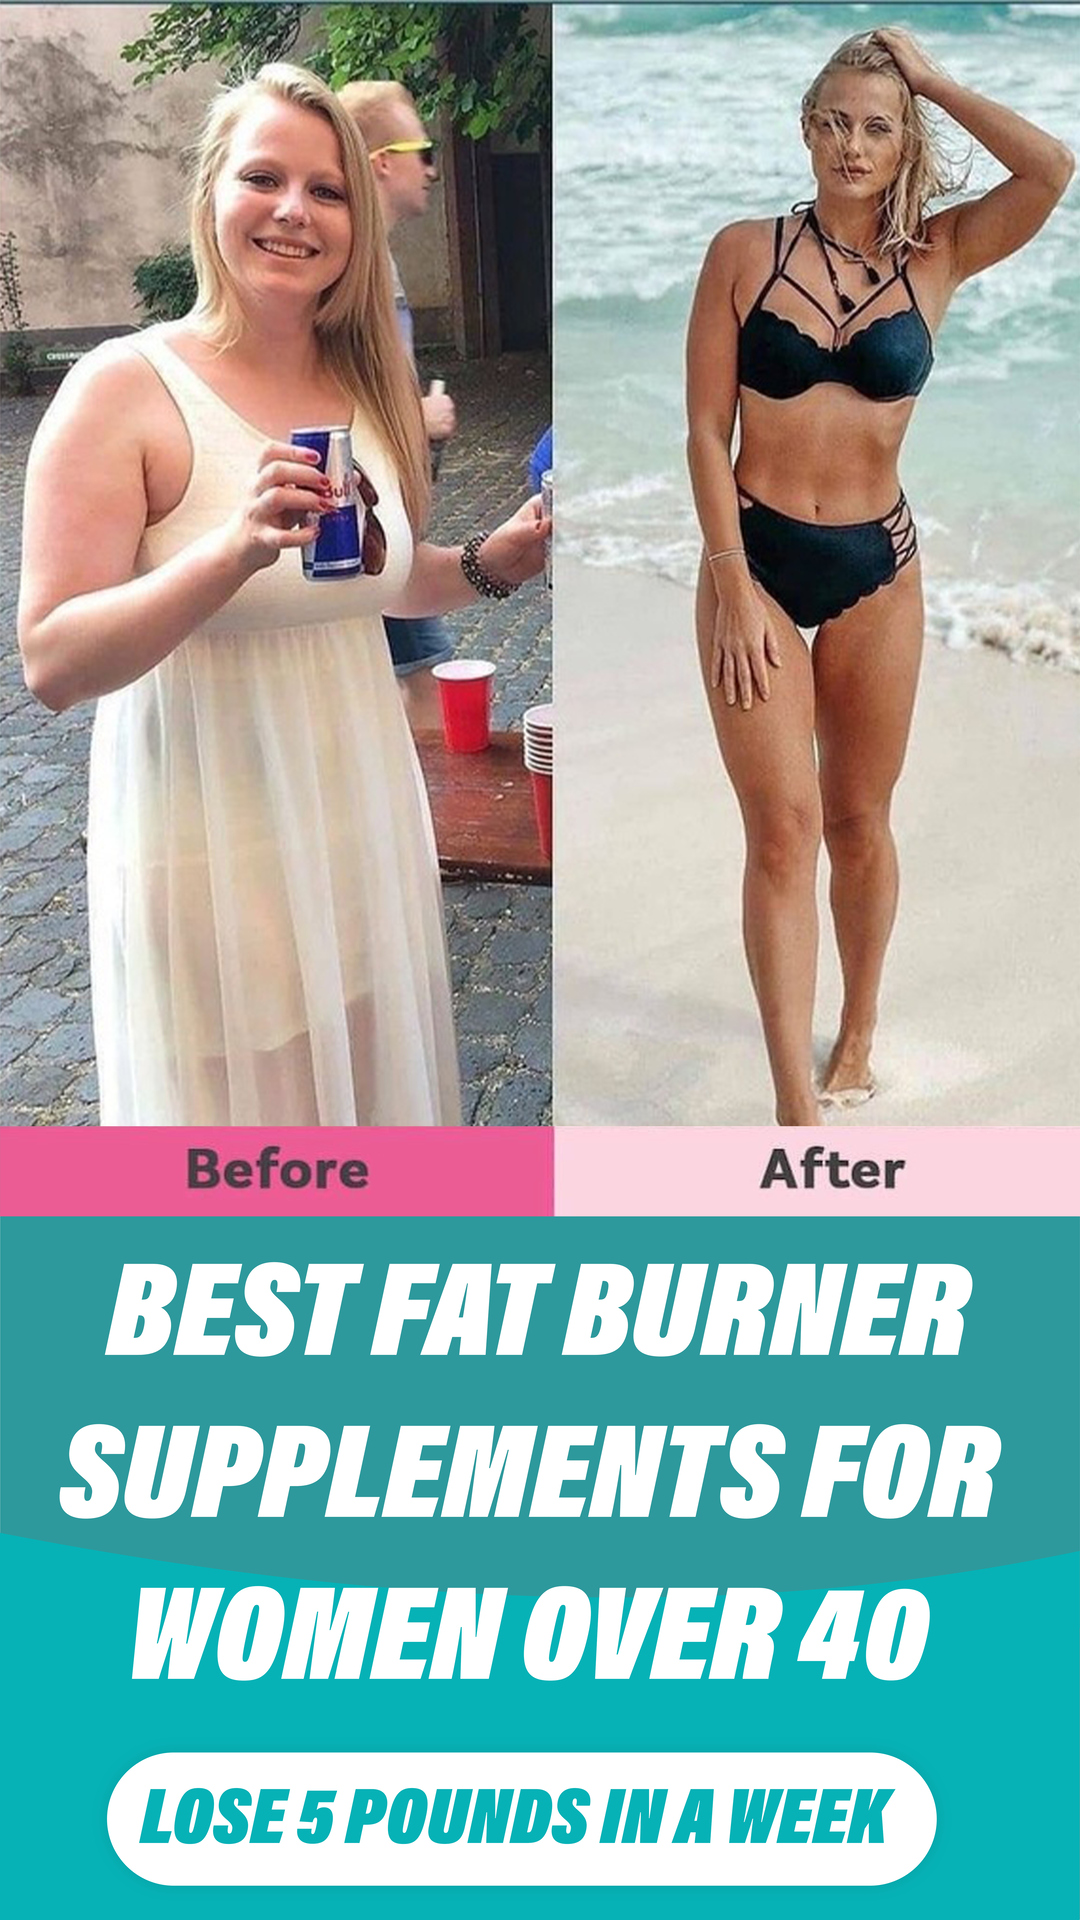 Best Fat Burner Supplements for Women Over 40 _ Lose 5 Pounds in a Week